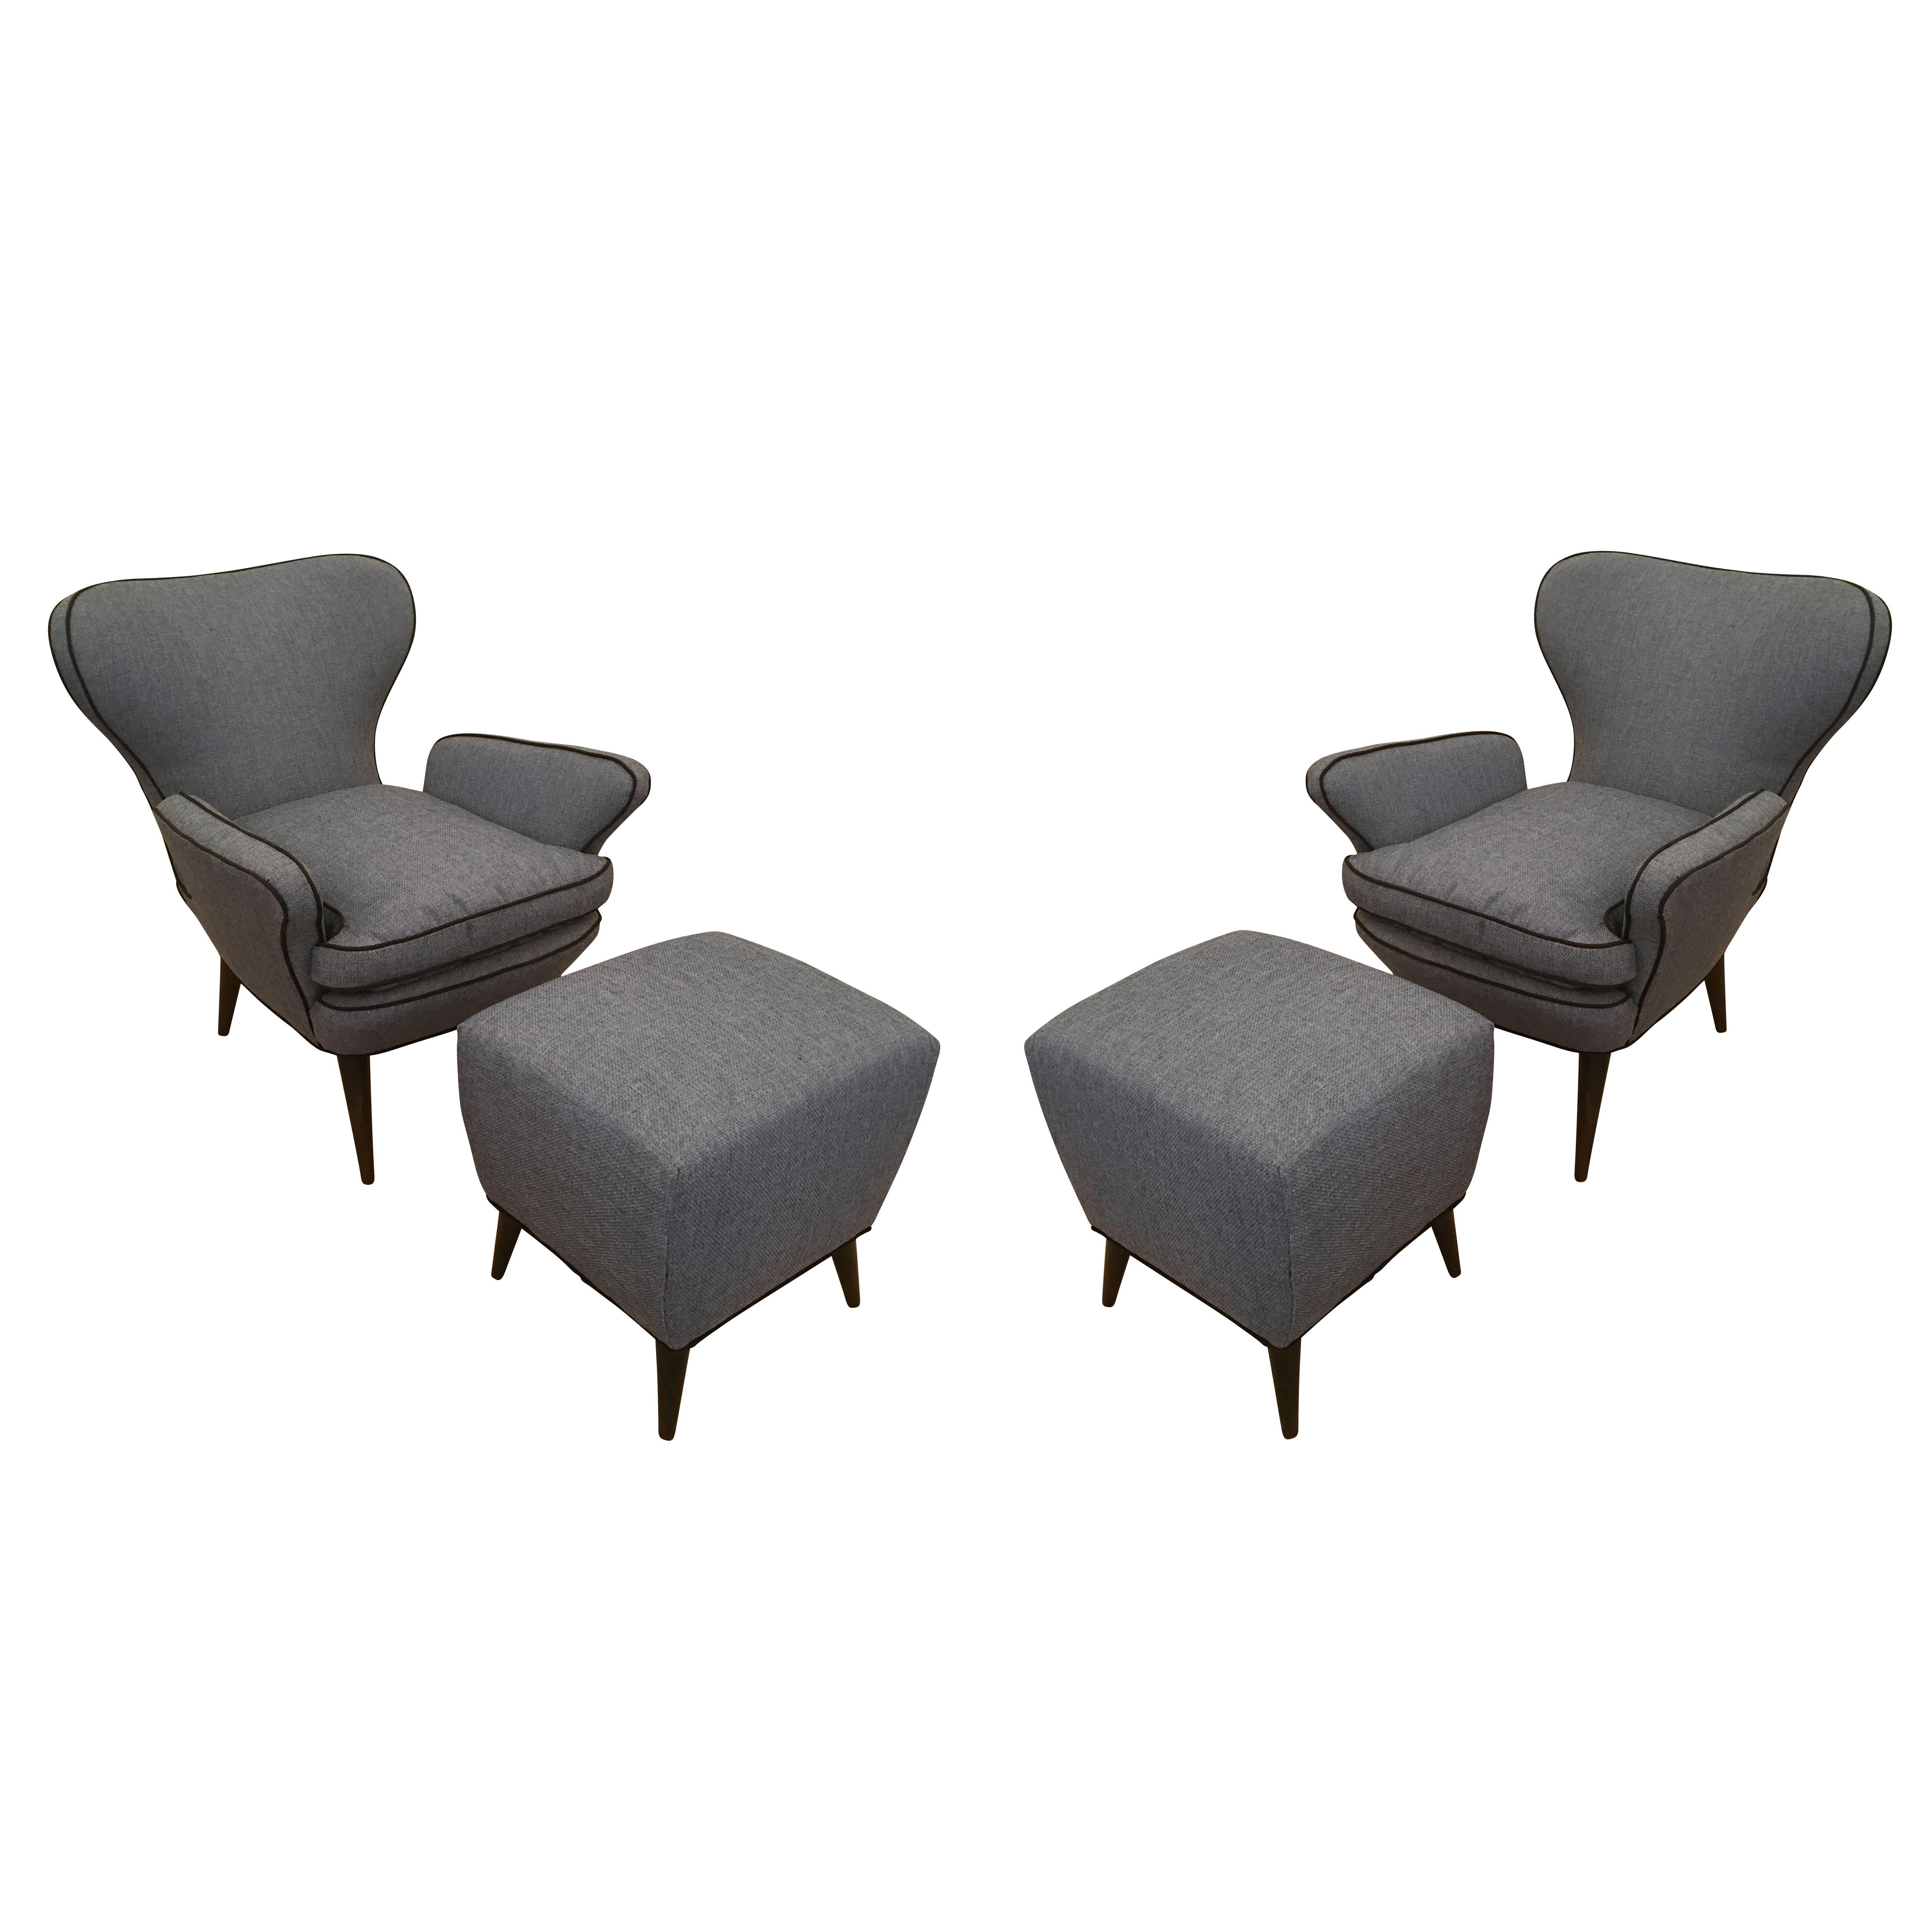 Pair of Mid-Century Armchairs with Foot Stools